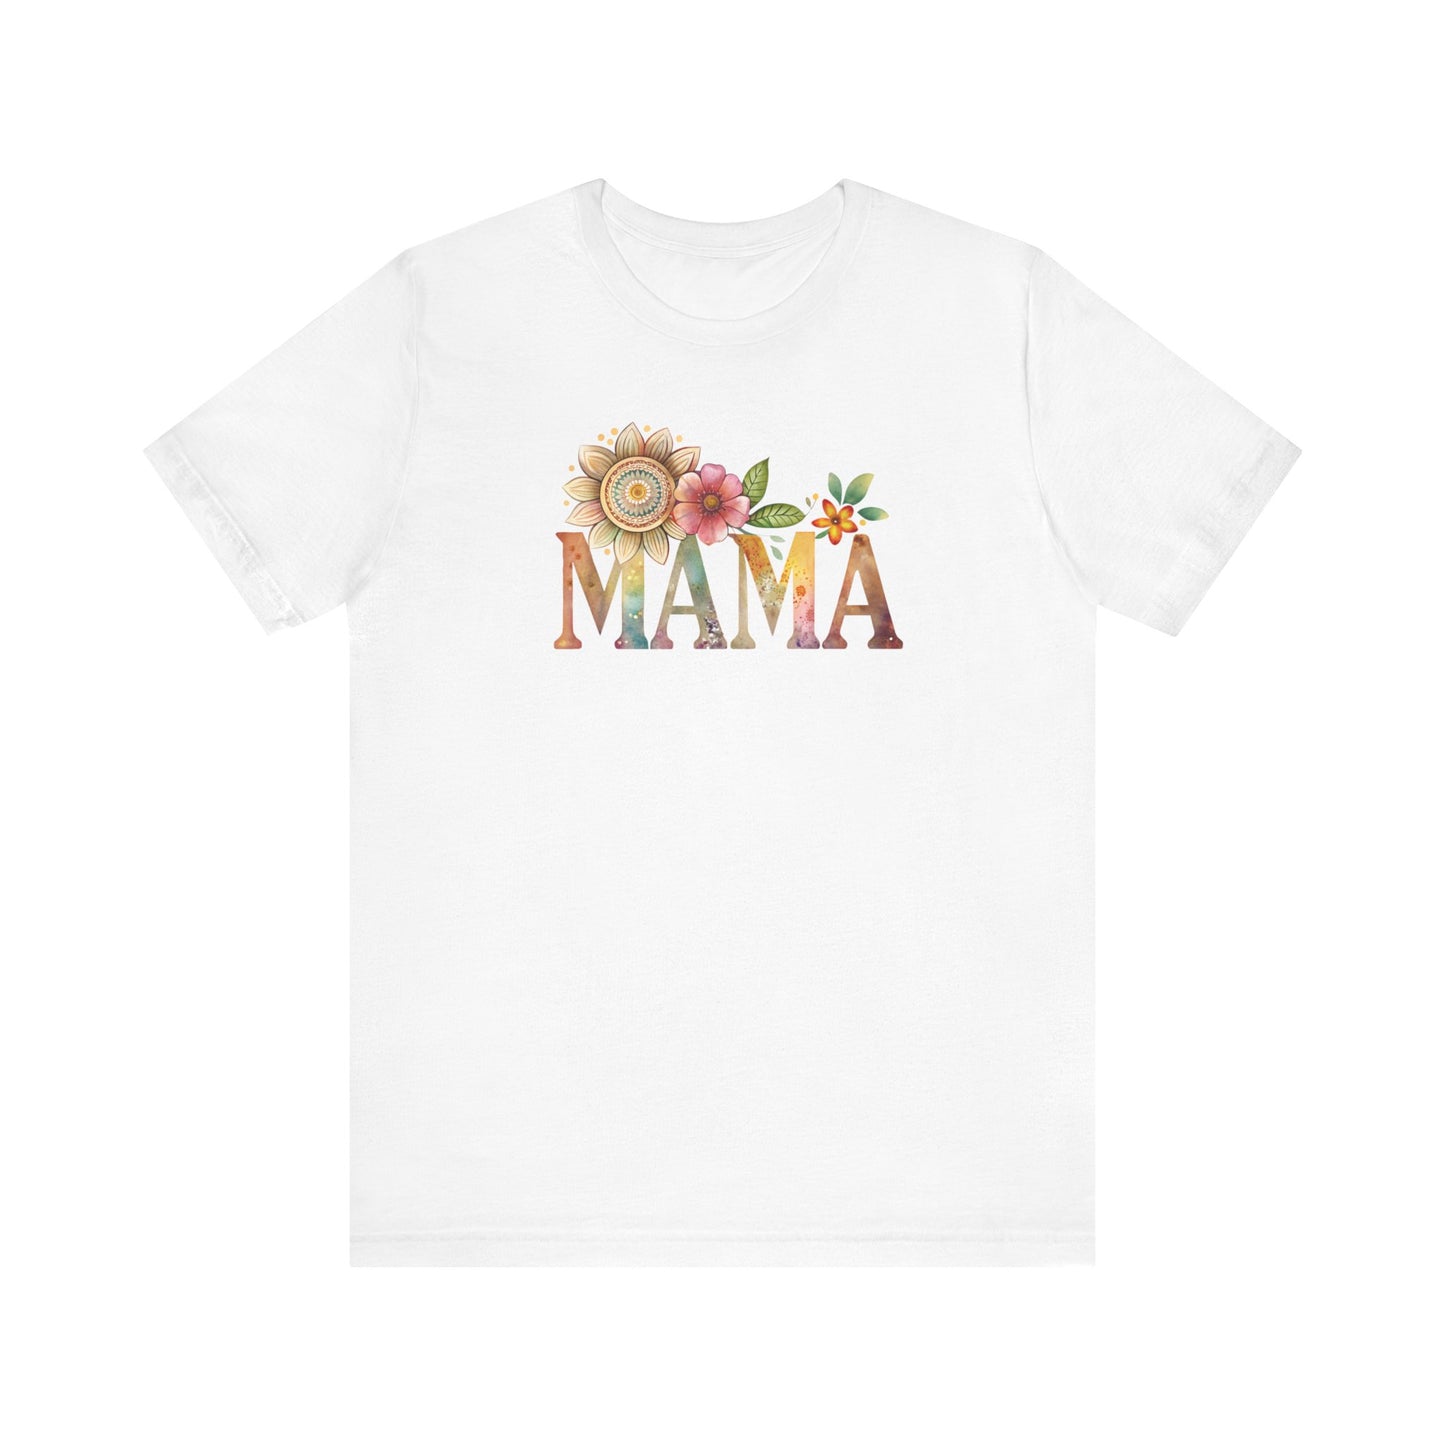 Mama Flowers Shirt, Mother's Day Gift, Mom Tee, Mama Floral Tshirt (Mom-43)